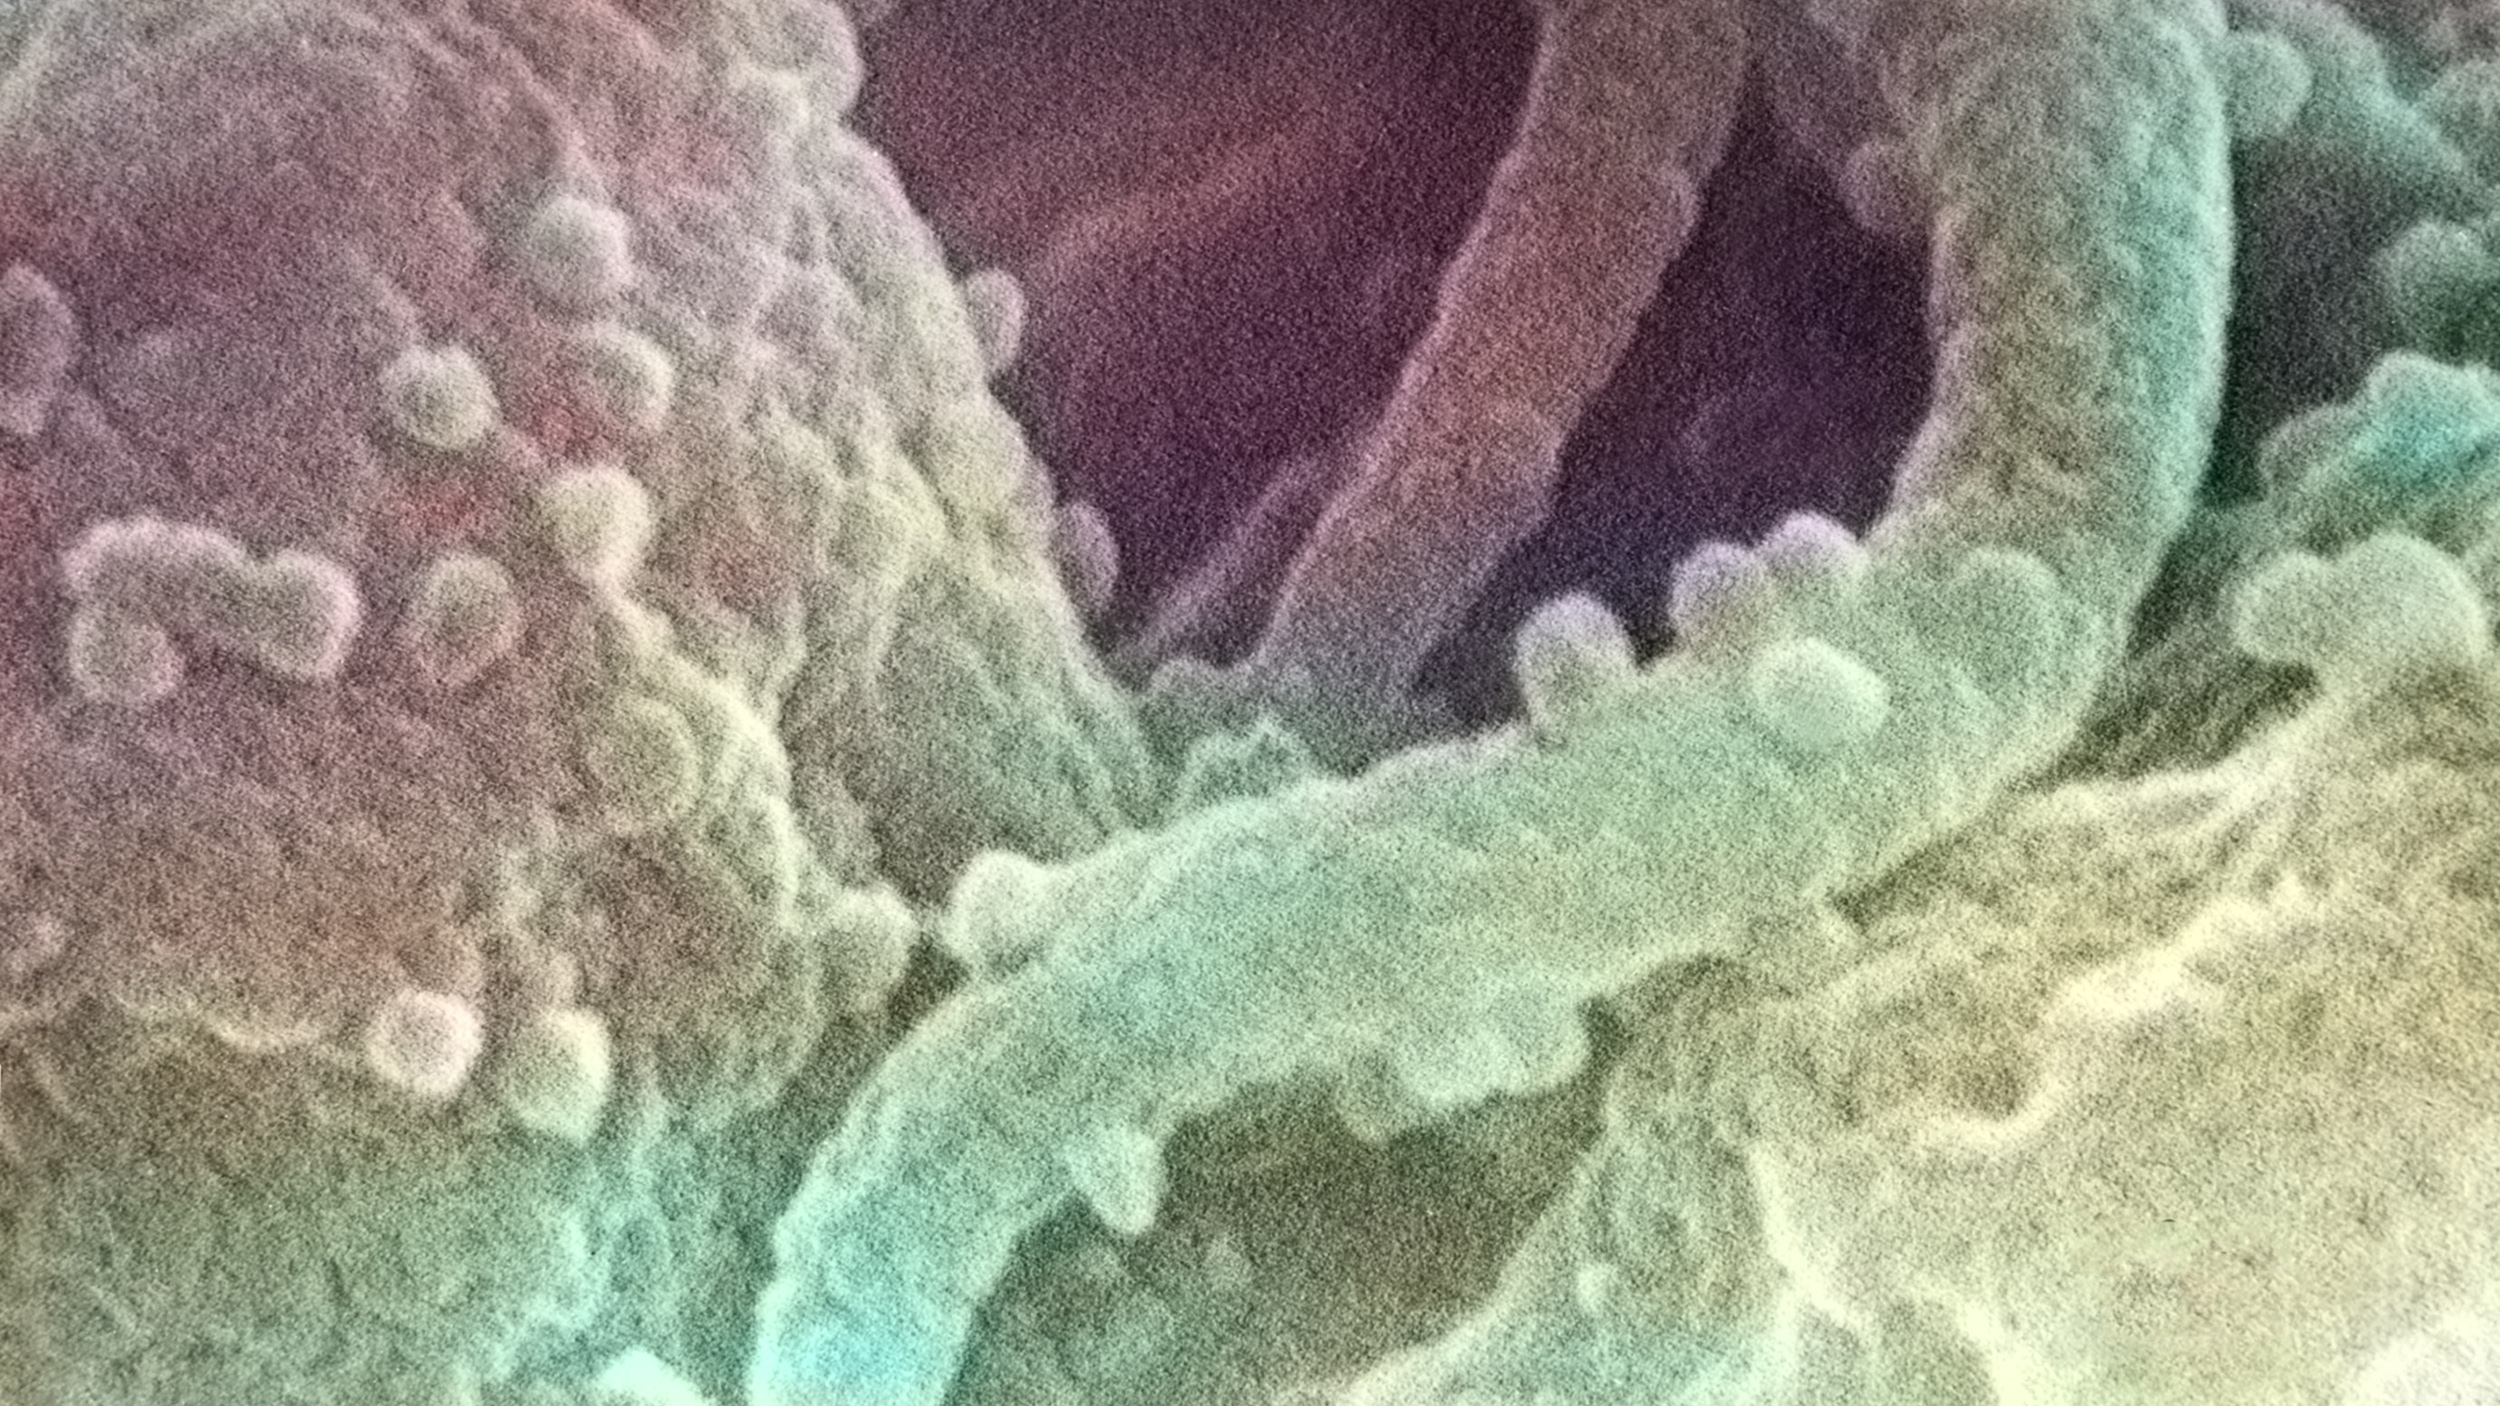 A close up image of a cell exhibiting immune resilience.